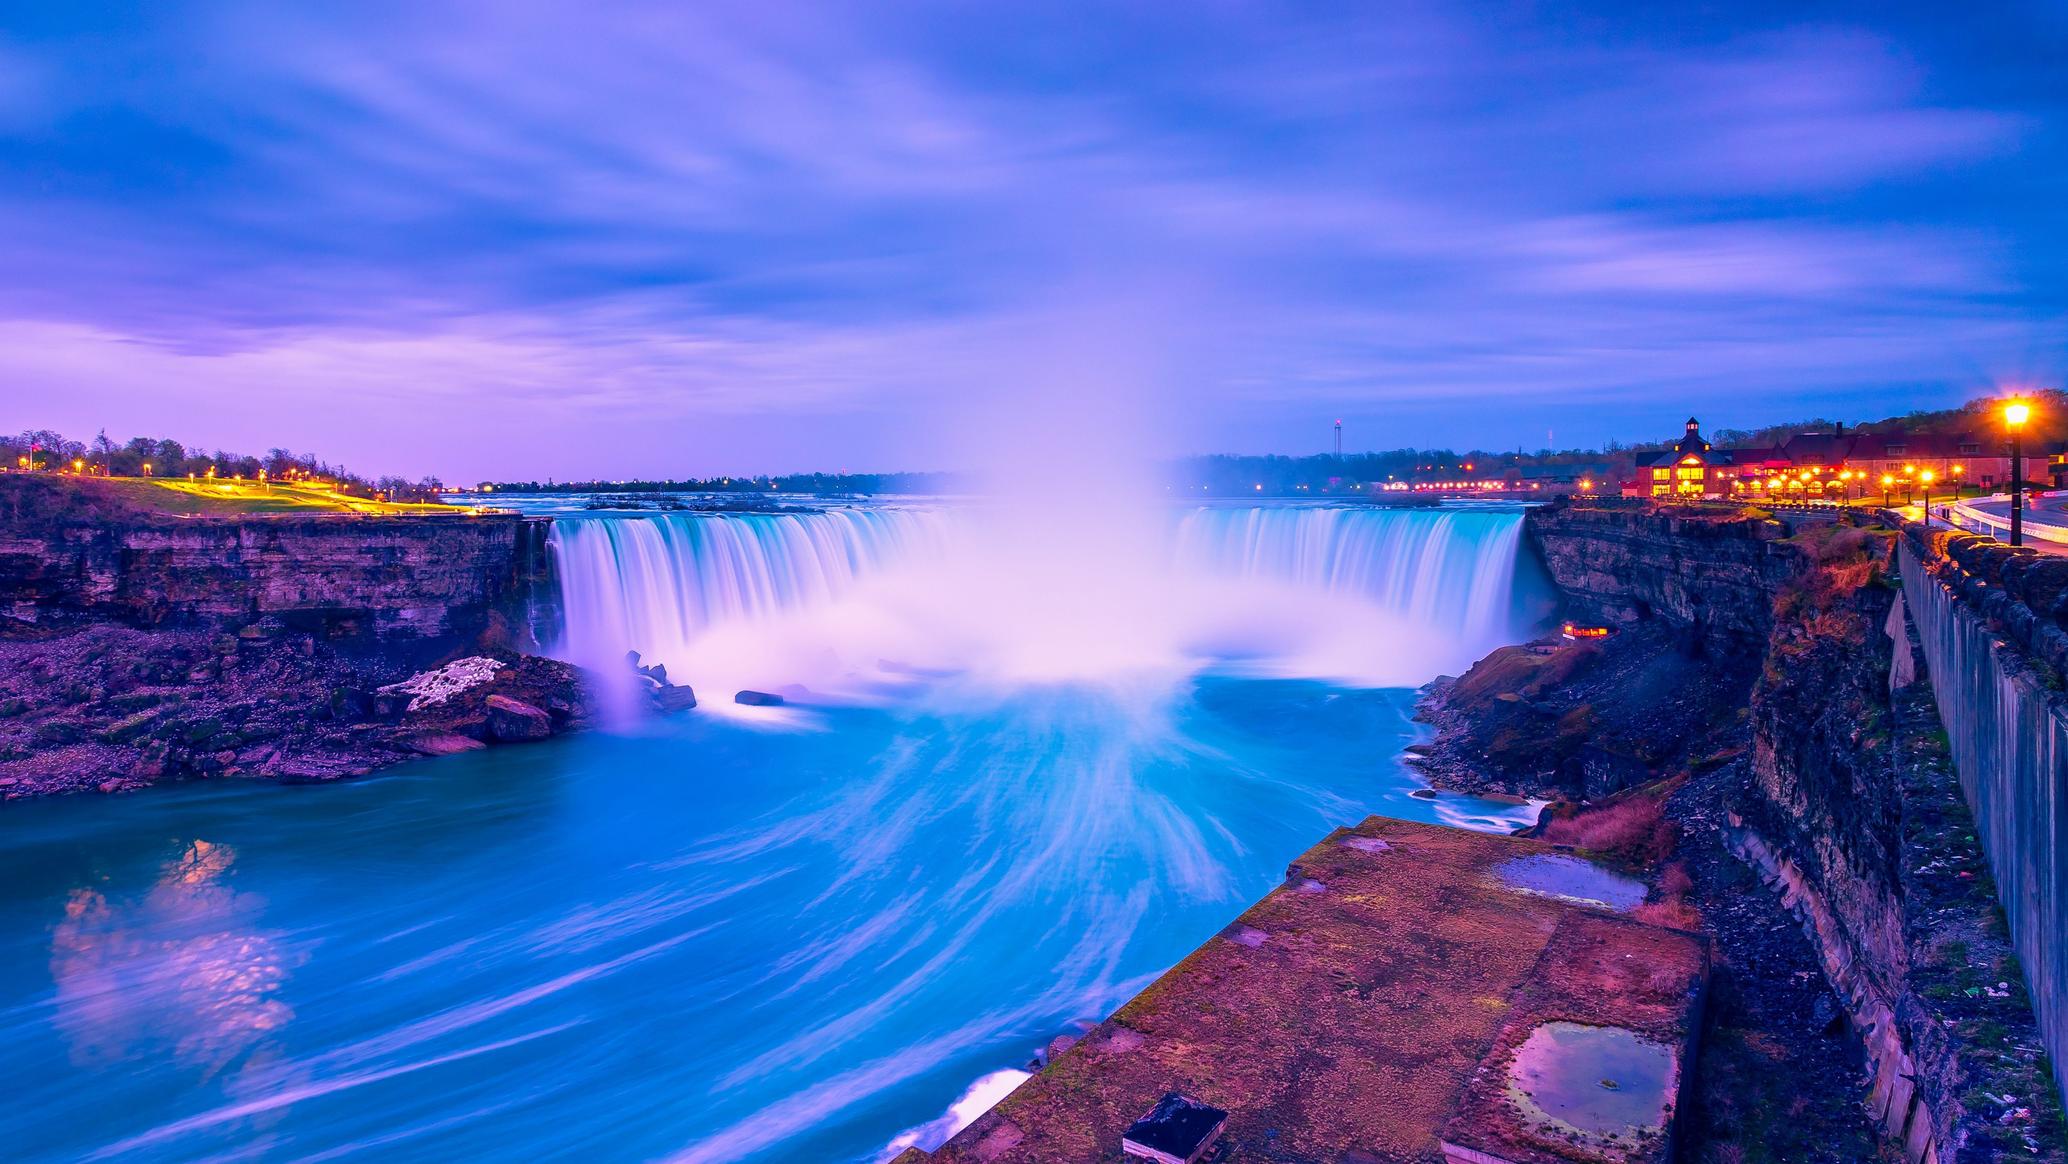 The best places to watch Niagara Falls